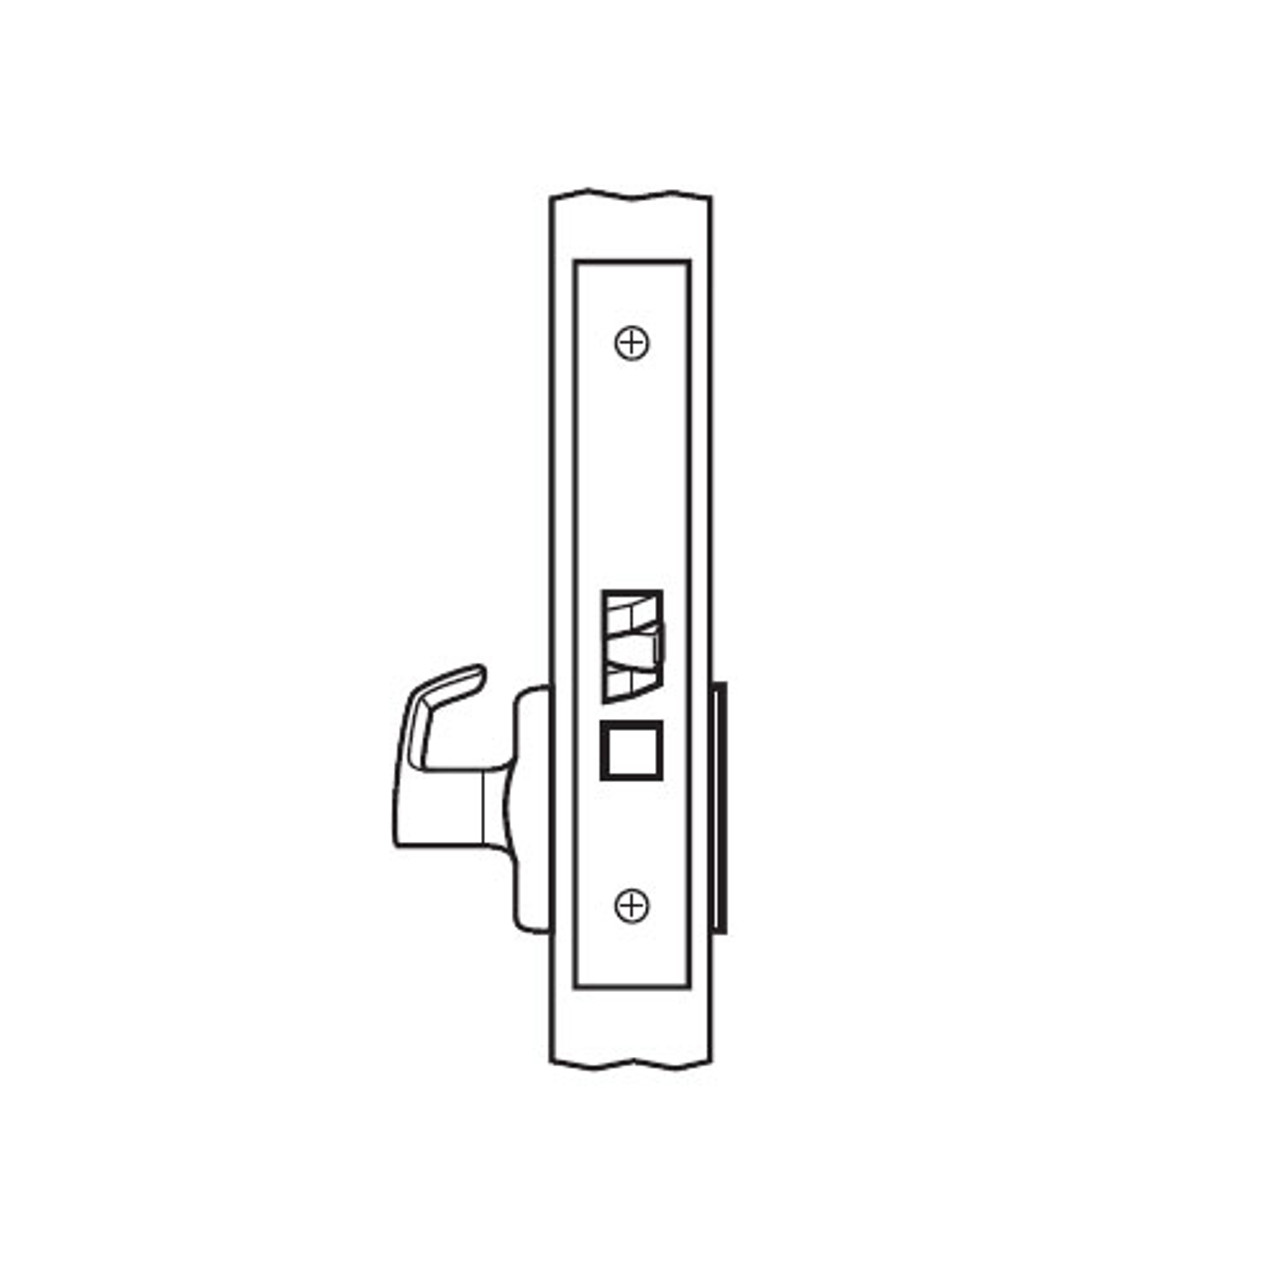 BM07-VL-32 Arrow Mortise Lock BM Series Exit Lever with Ventura Design in Bright Stainless Steel